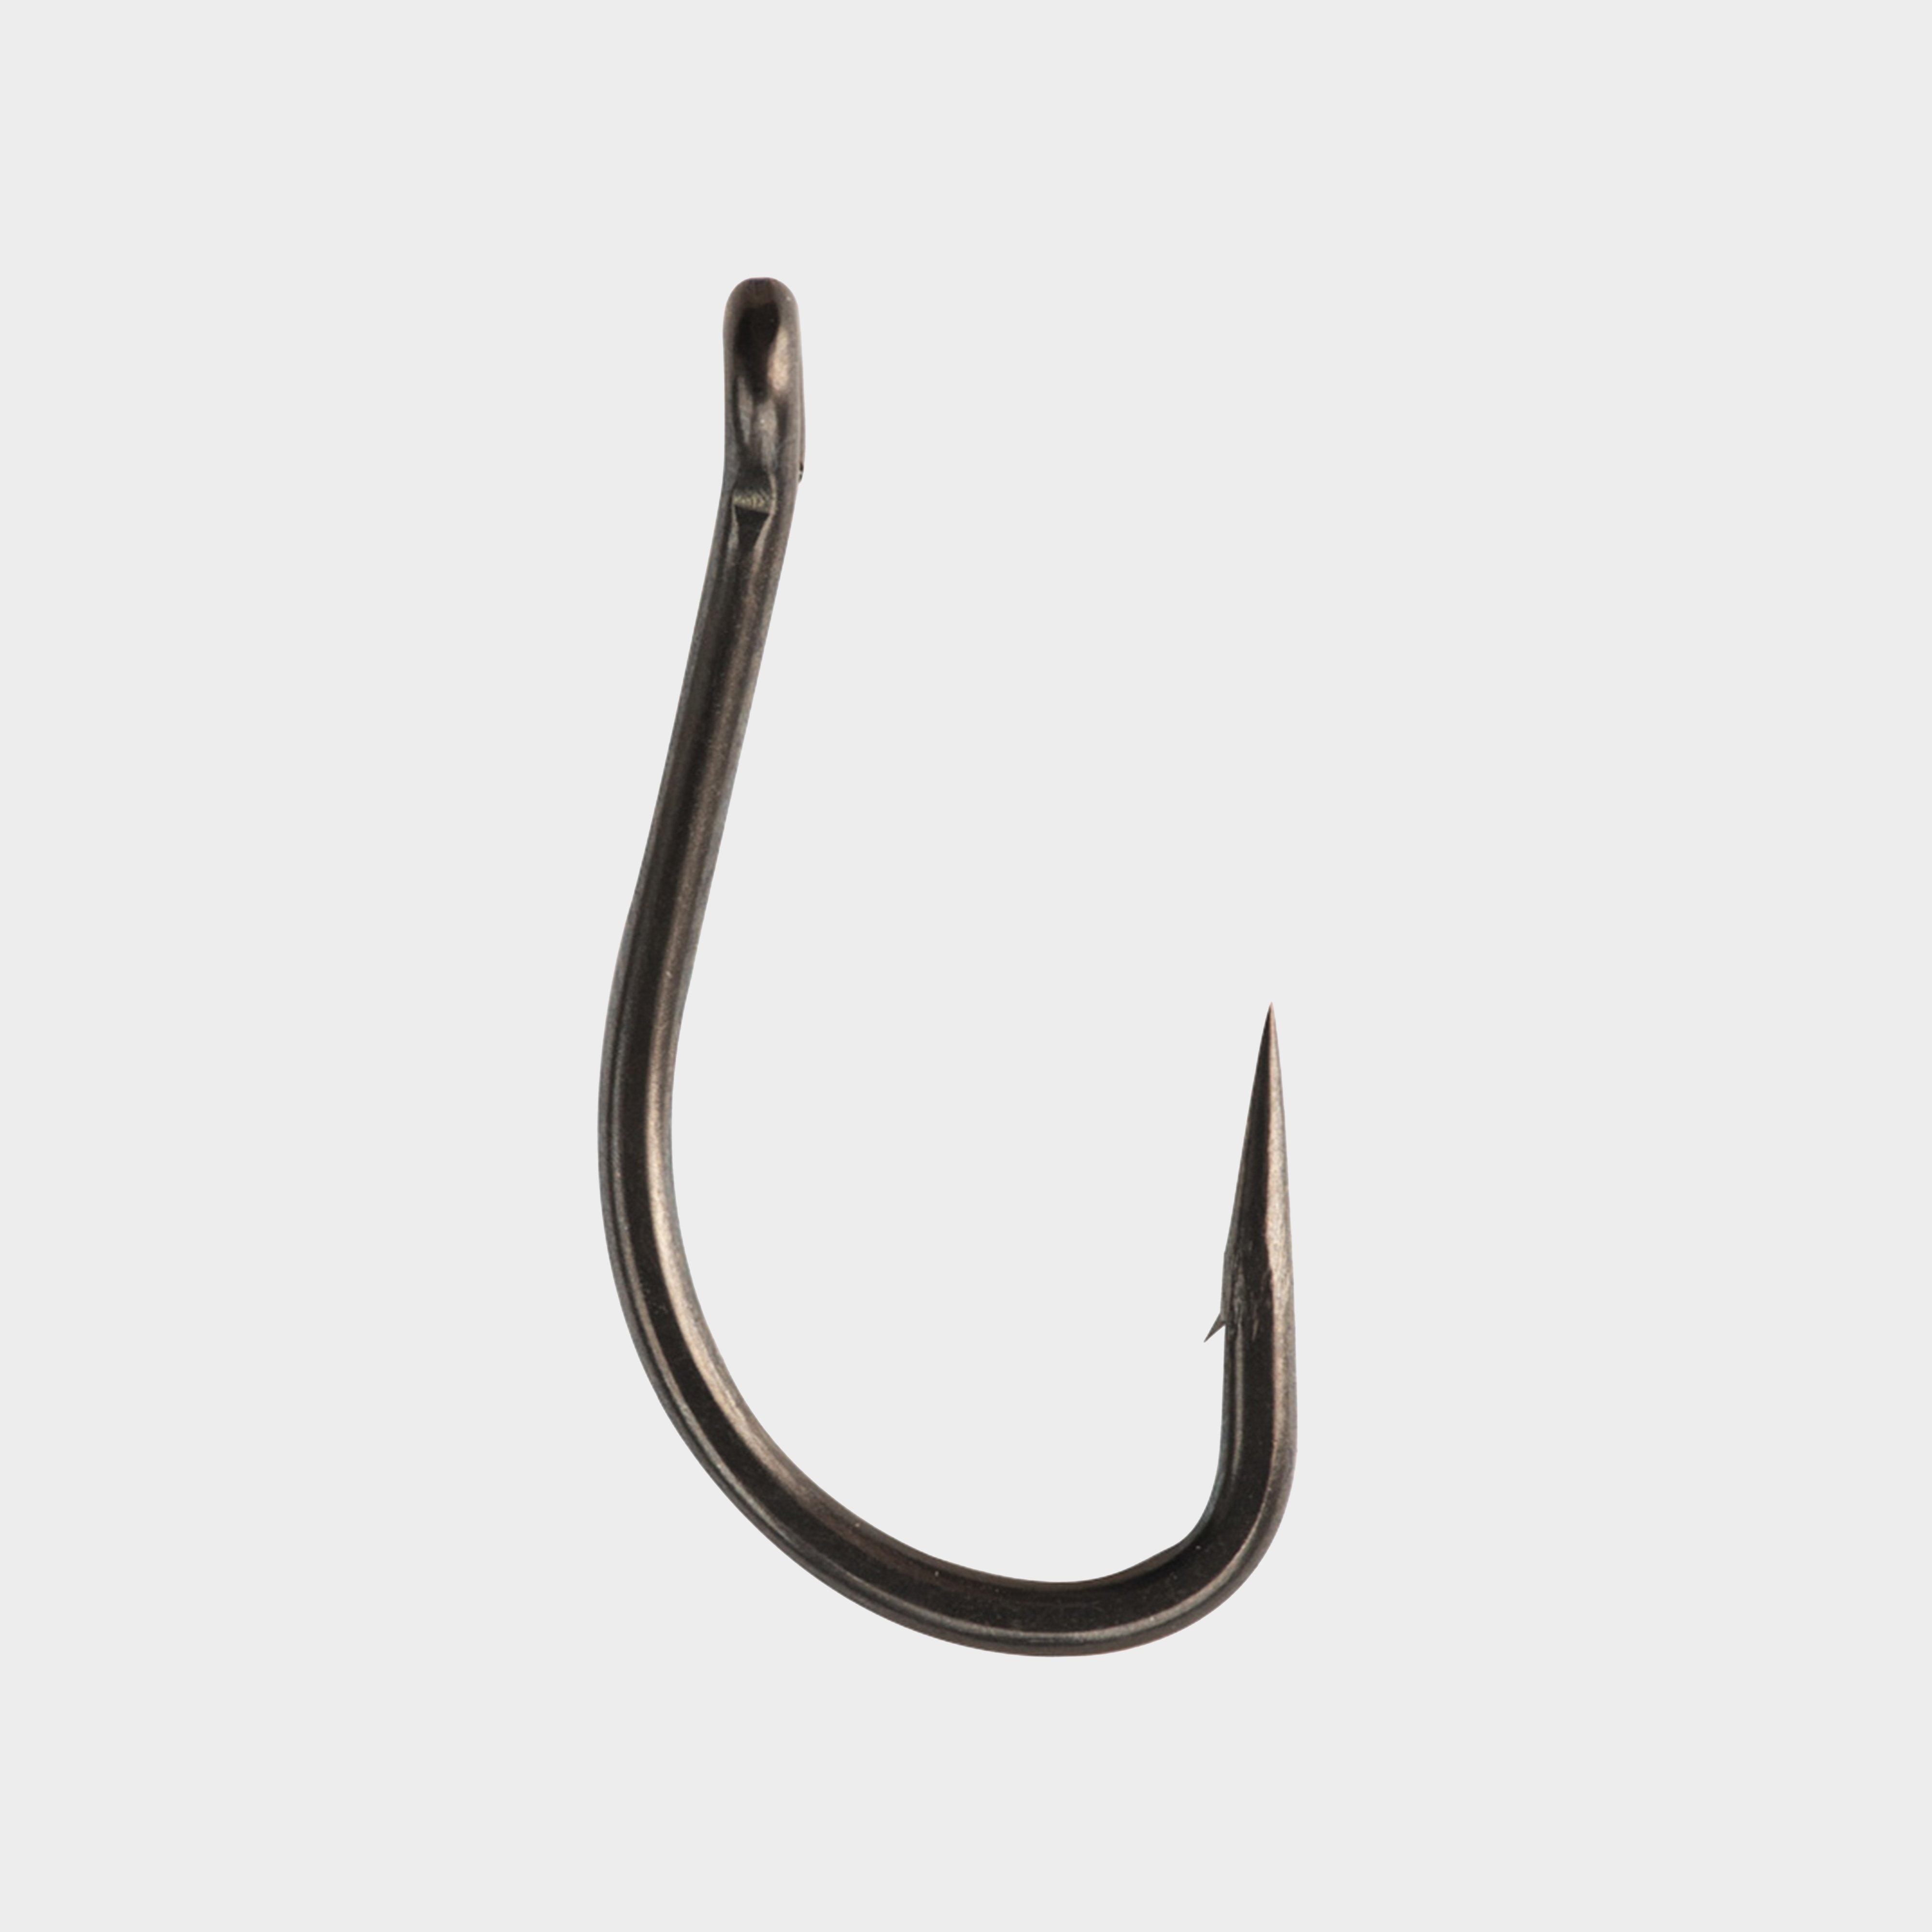 Photos - Fishing Hook / Jig Head Angler THINKING  Out-Turned Eye Hook Size 5  (Barbless)